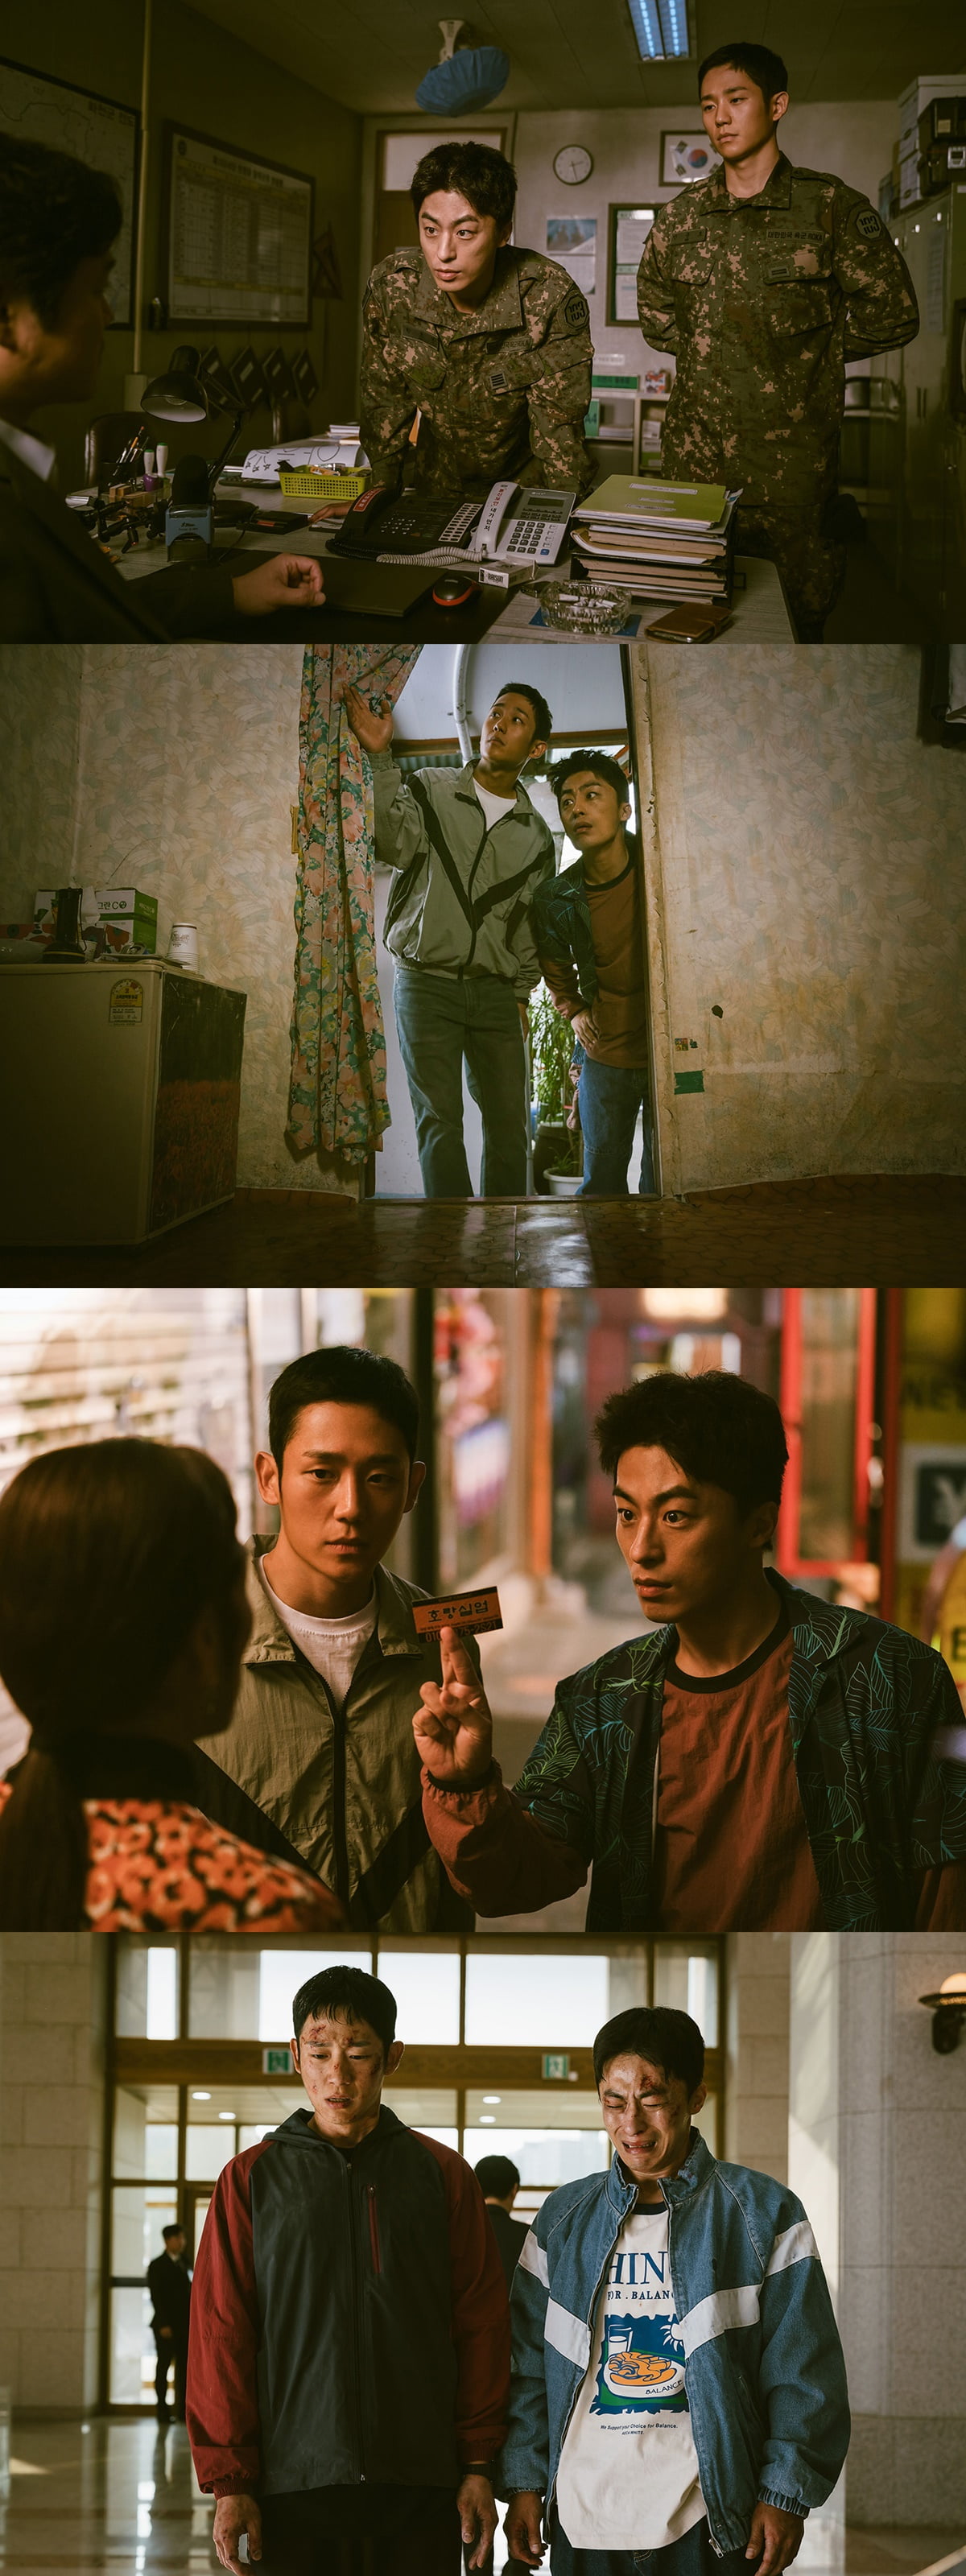 Jun Ho-yeol's comeback... Jung Hae-in and Koo Kyo-hwan, two people who didn't seem to get along